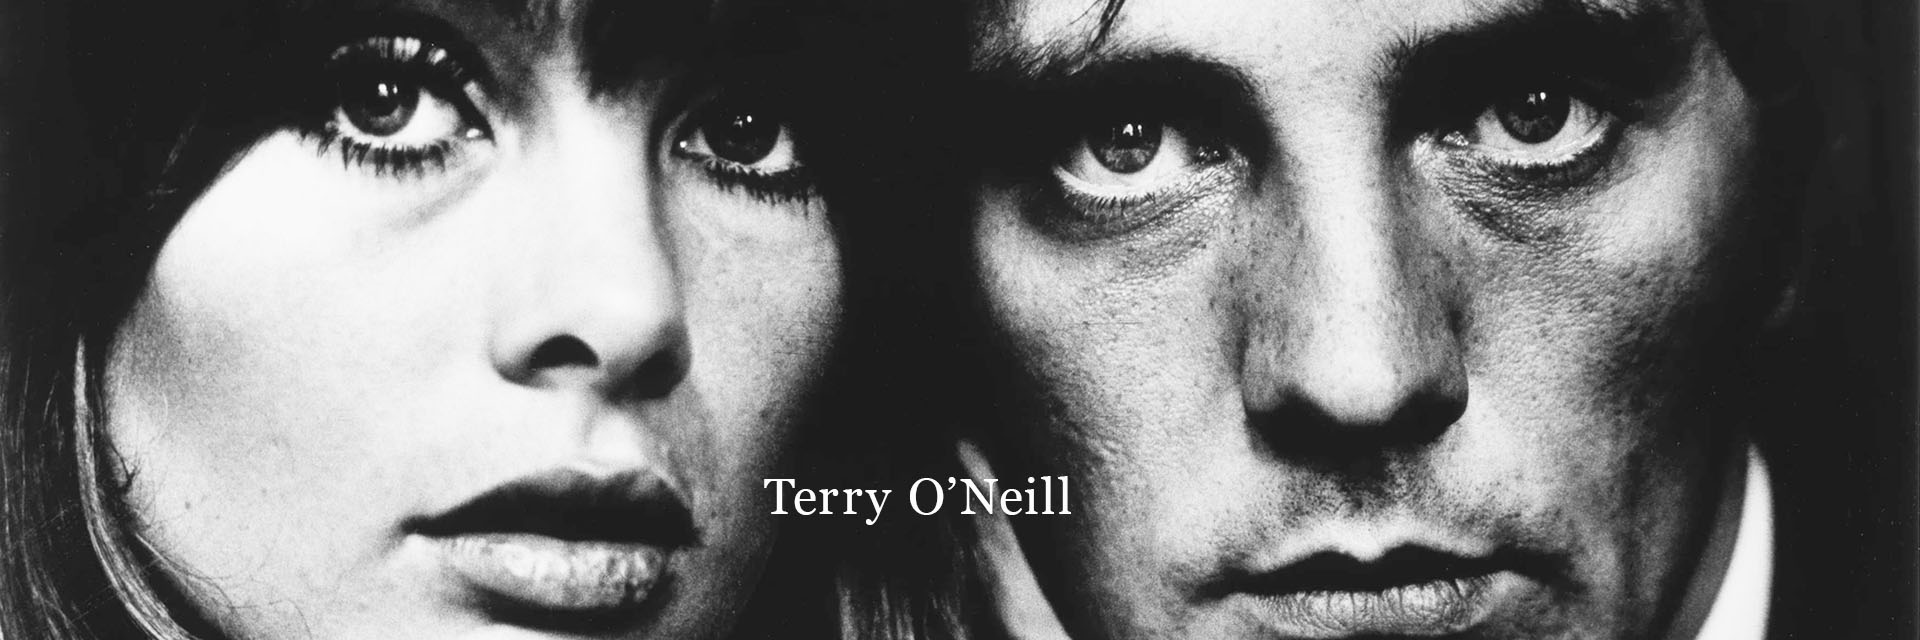 Limited edition hand signed prints by Terry O'Neill from Galerie Prints